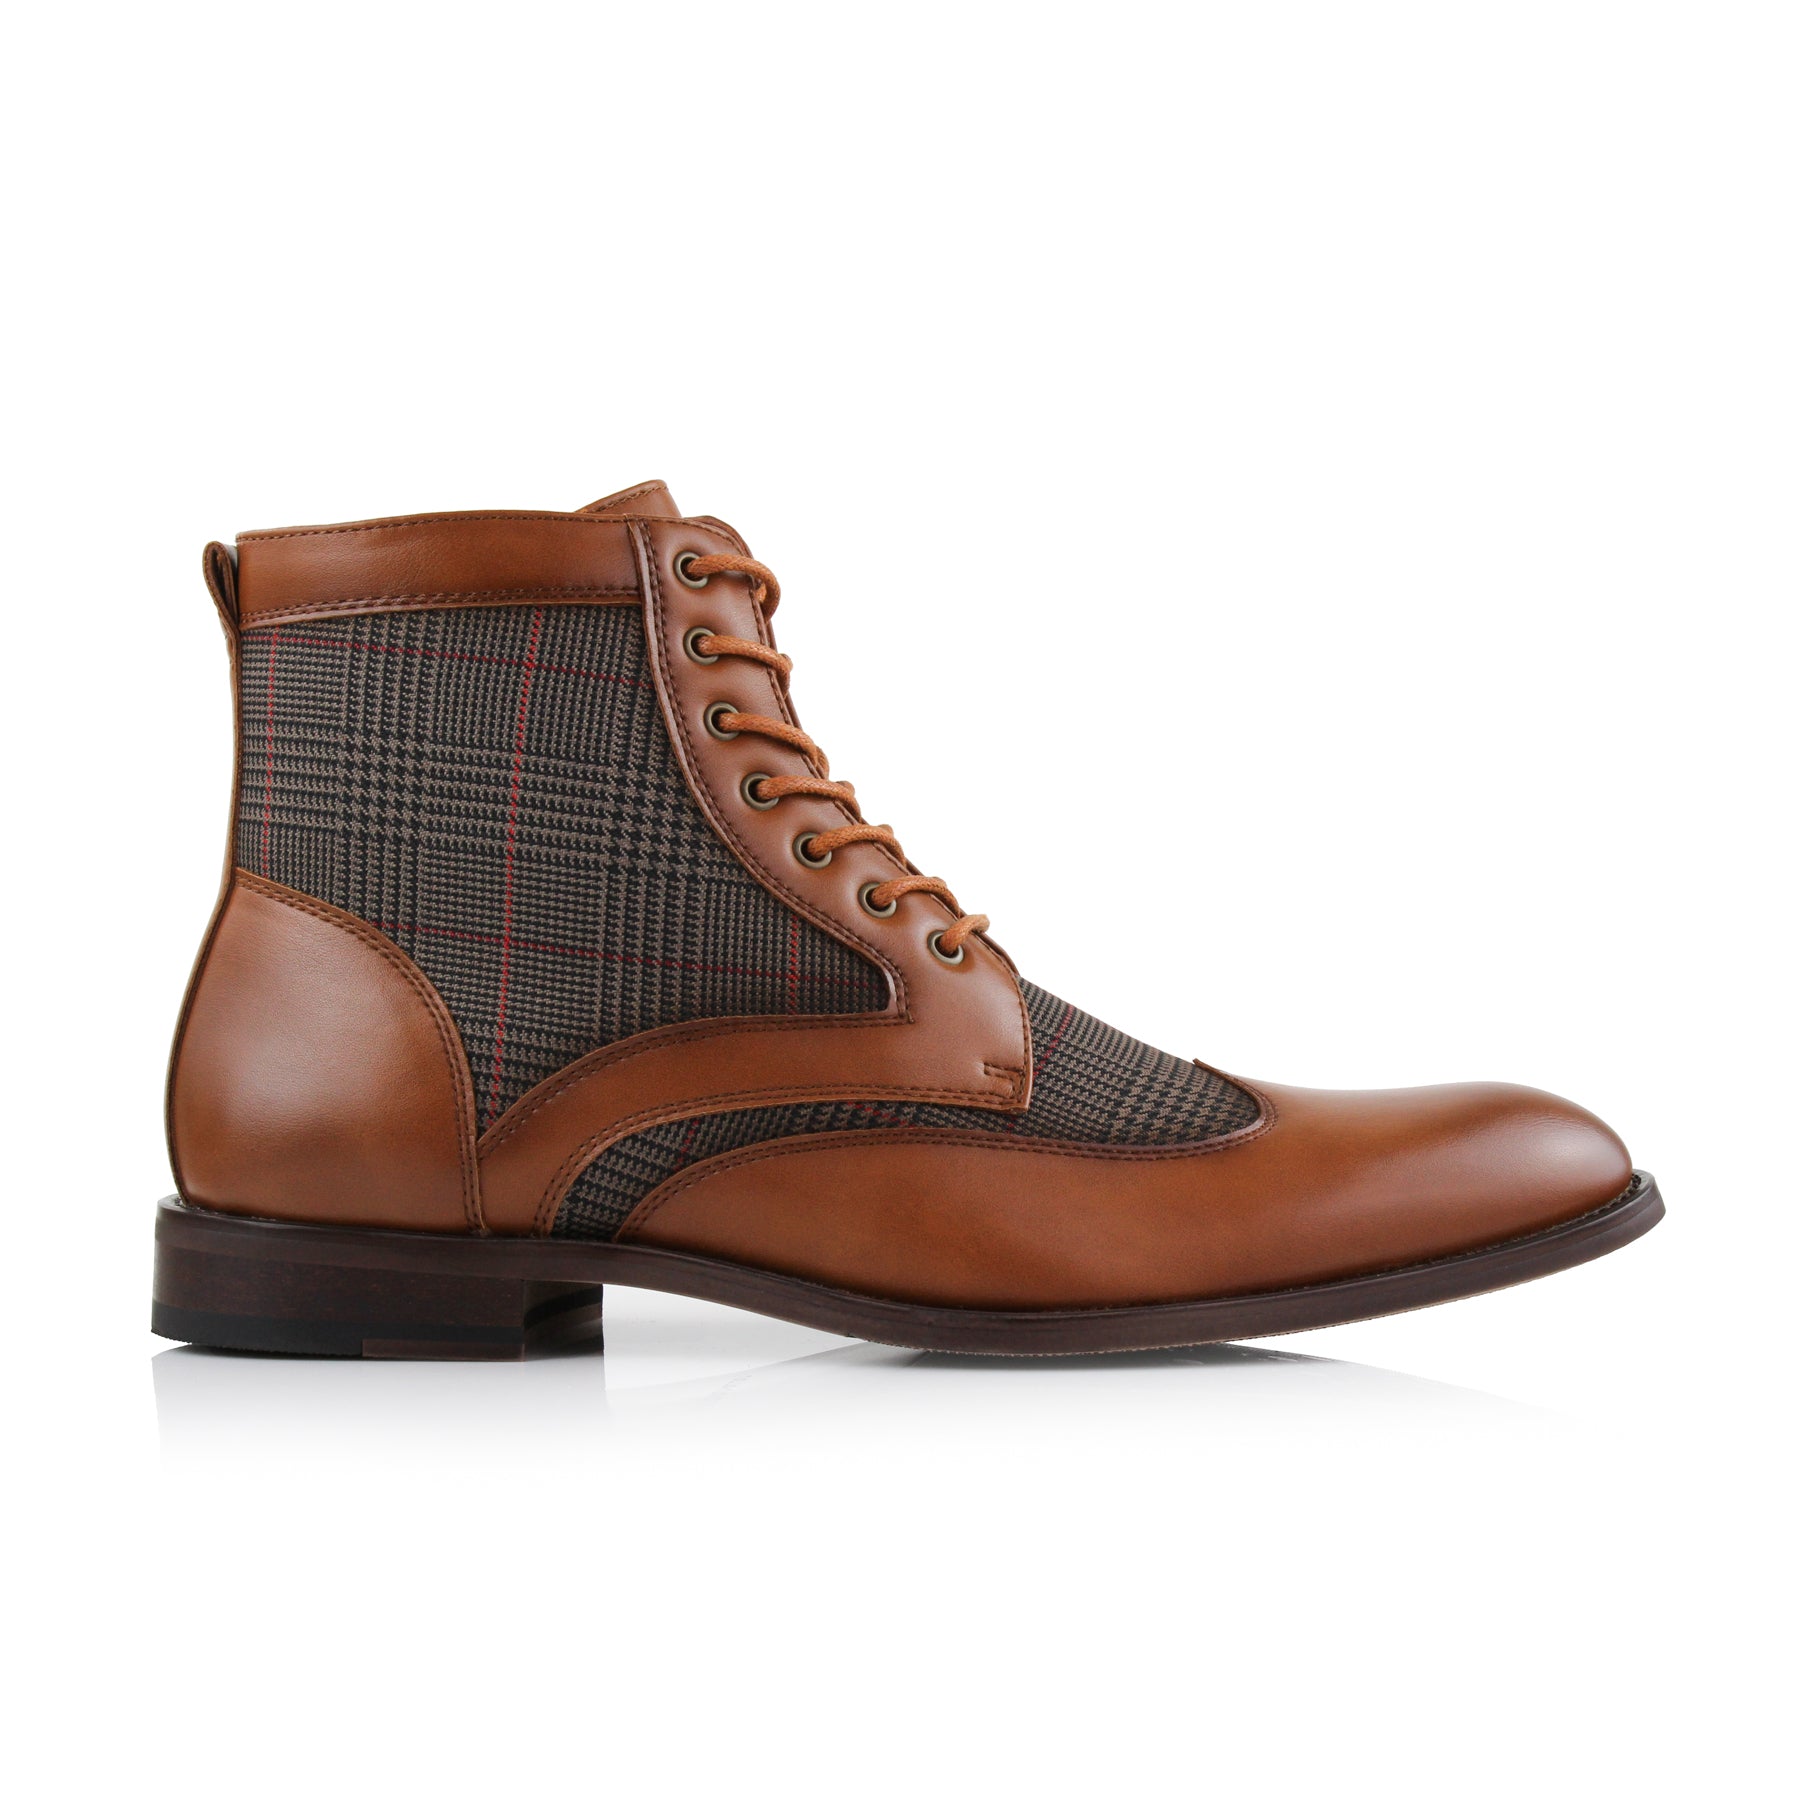 Plaid Wingtip Boots | Gideon by Ferro Aldo | Conal Footwear | Outer Side Angle View